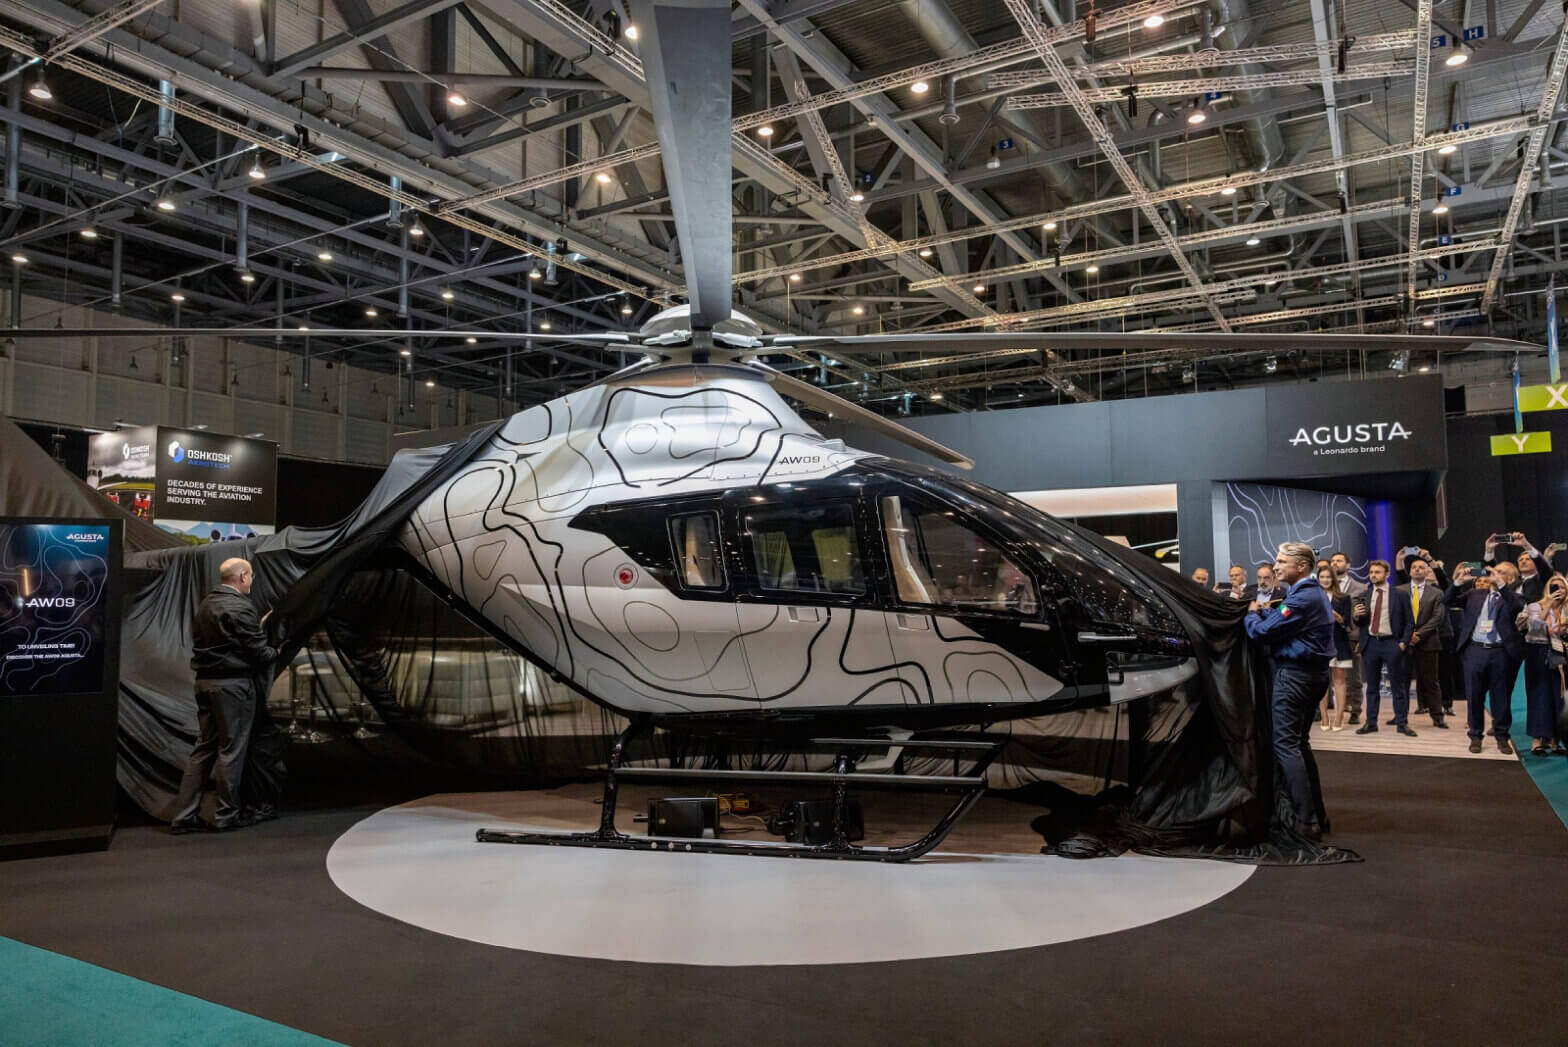 Leonardo unveils Agusta VIP/corporate layout for AW09 single-engine helicopter